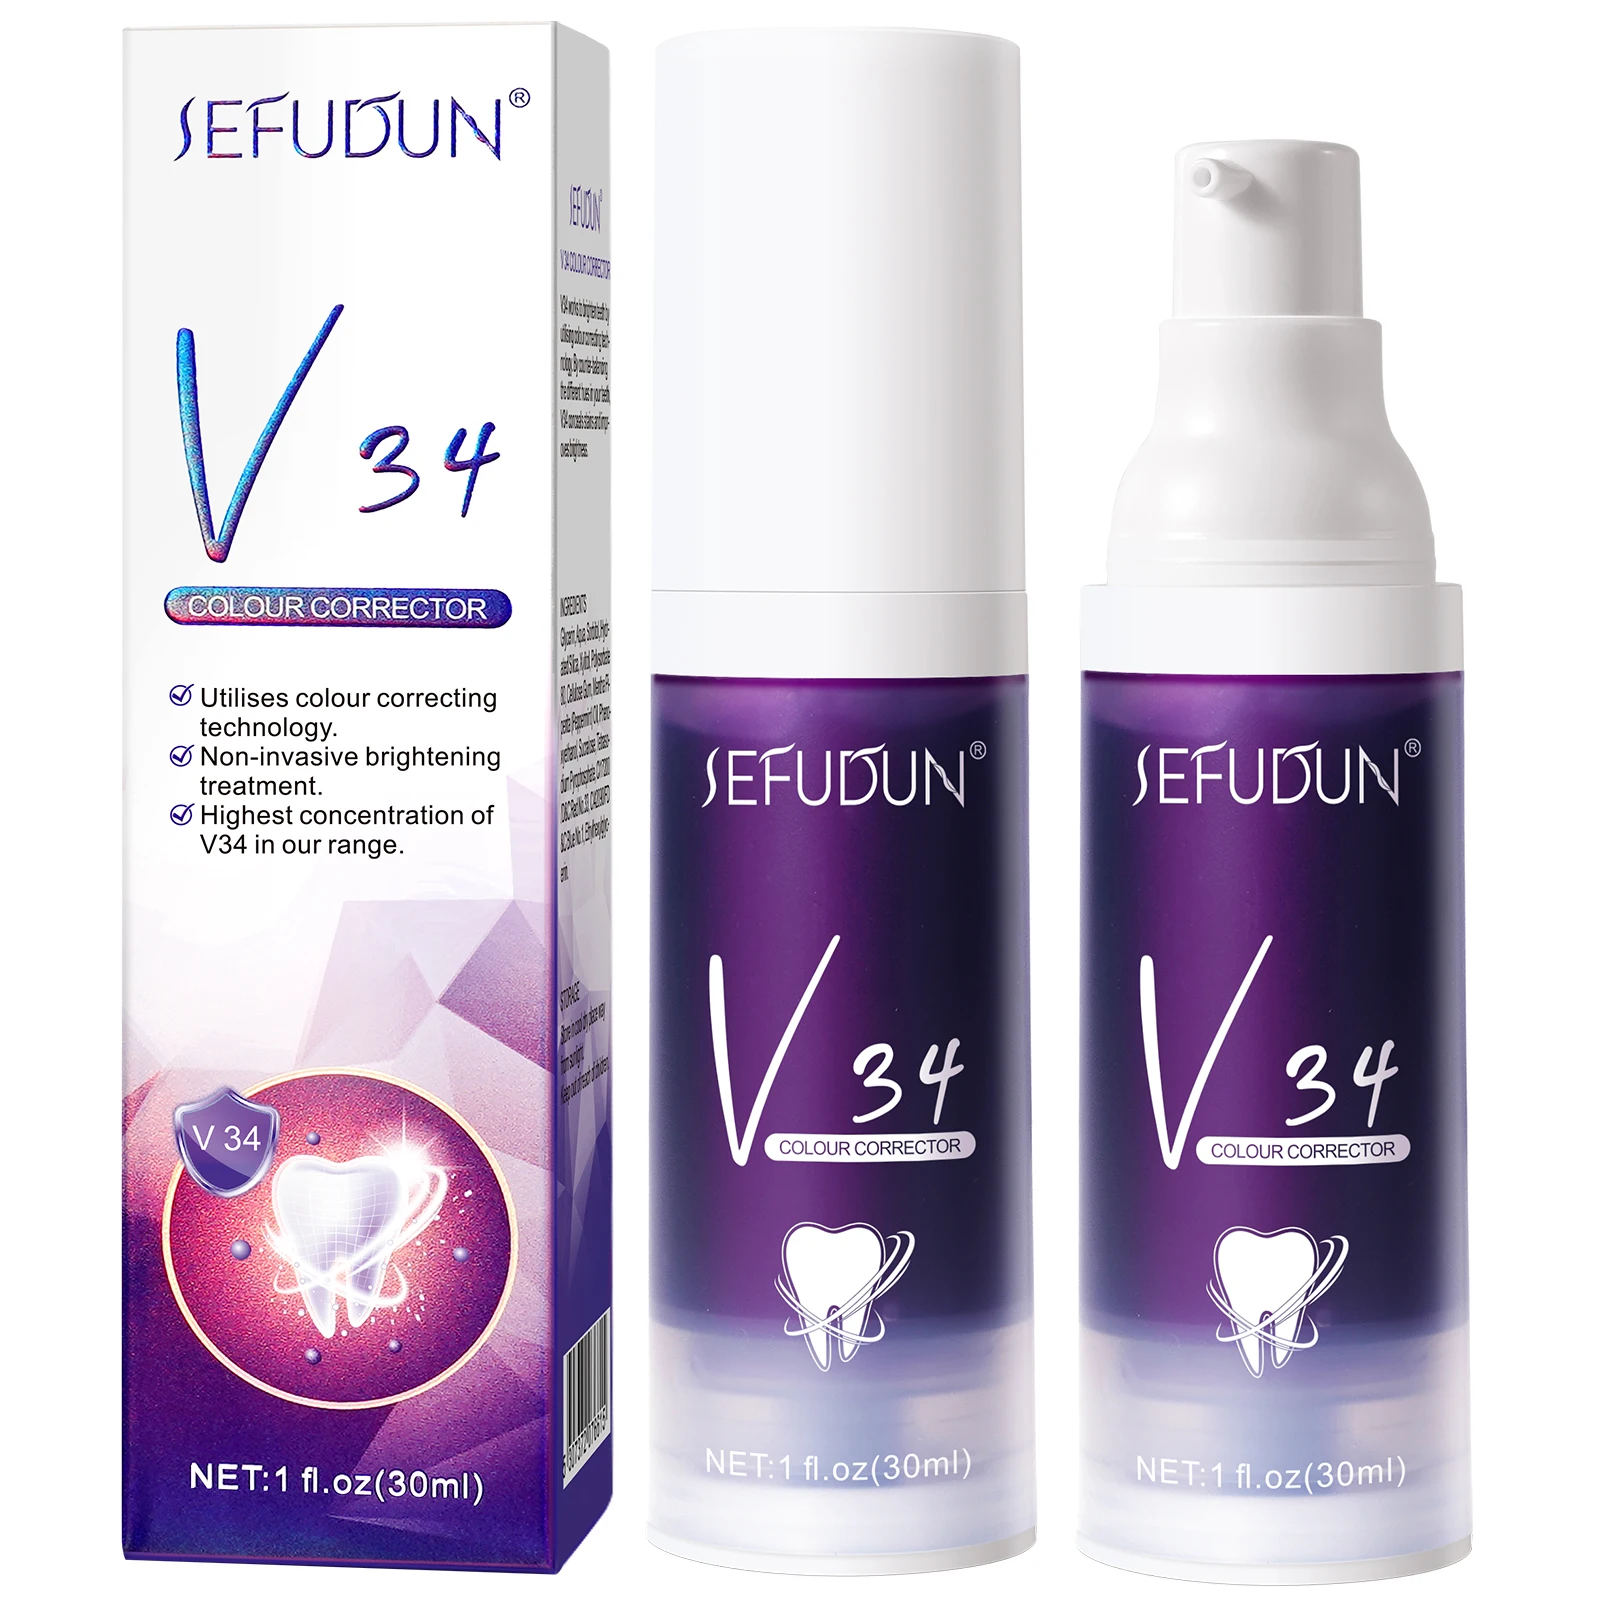 

SEFUDUN Private Label Natural Organic Stain Removal Teeth Whitening Foam V34 Colour Corrector Teeth Whitening Foam Toothpaste